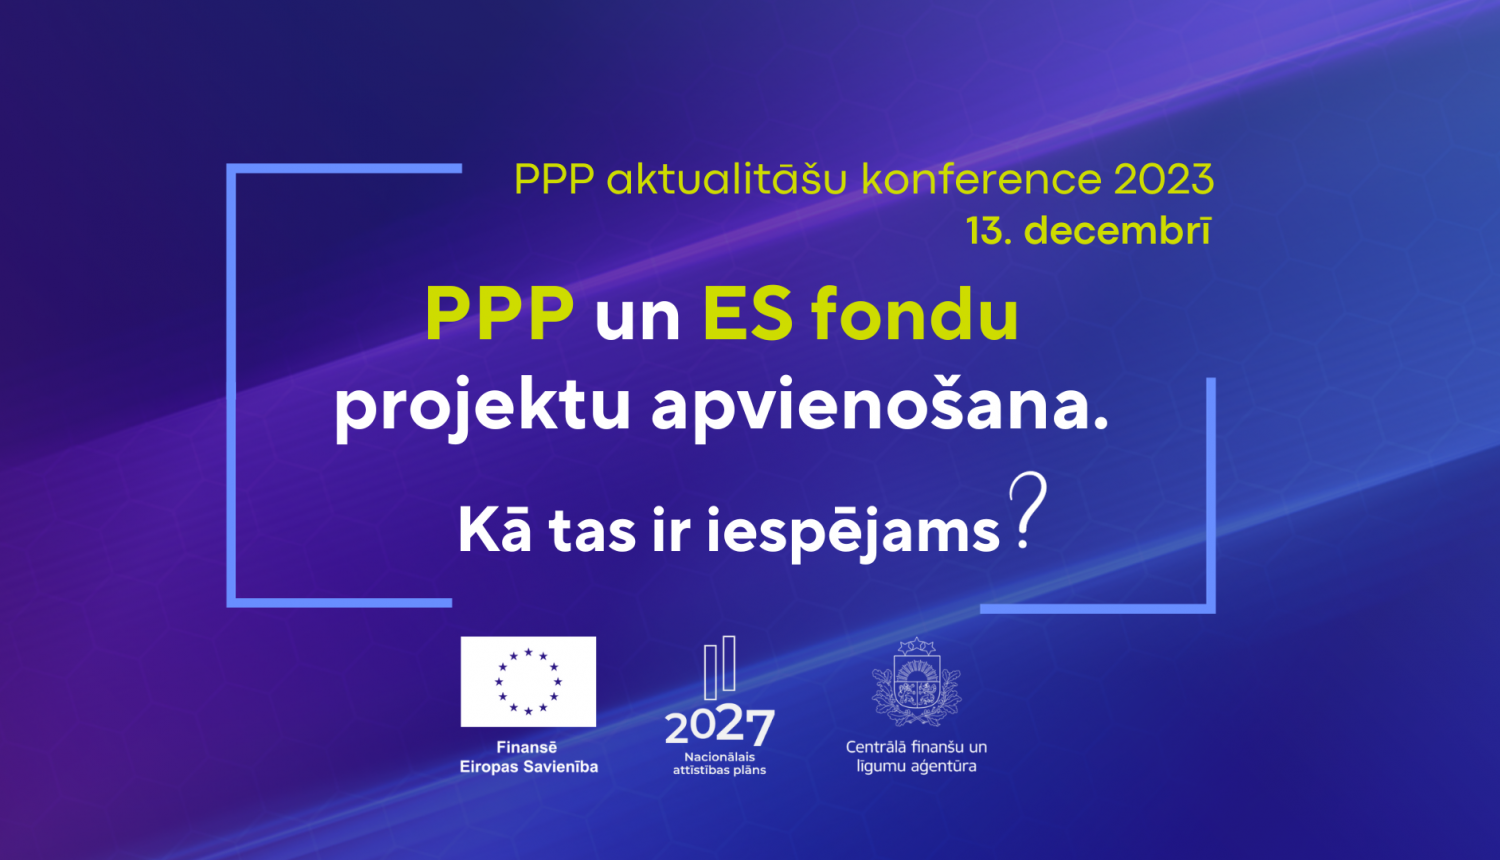 PPP konference